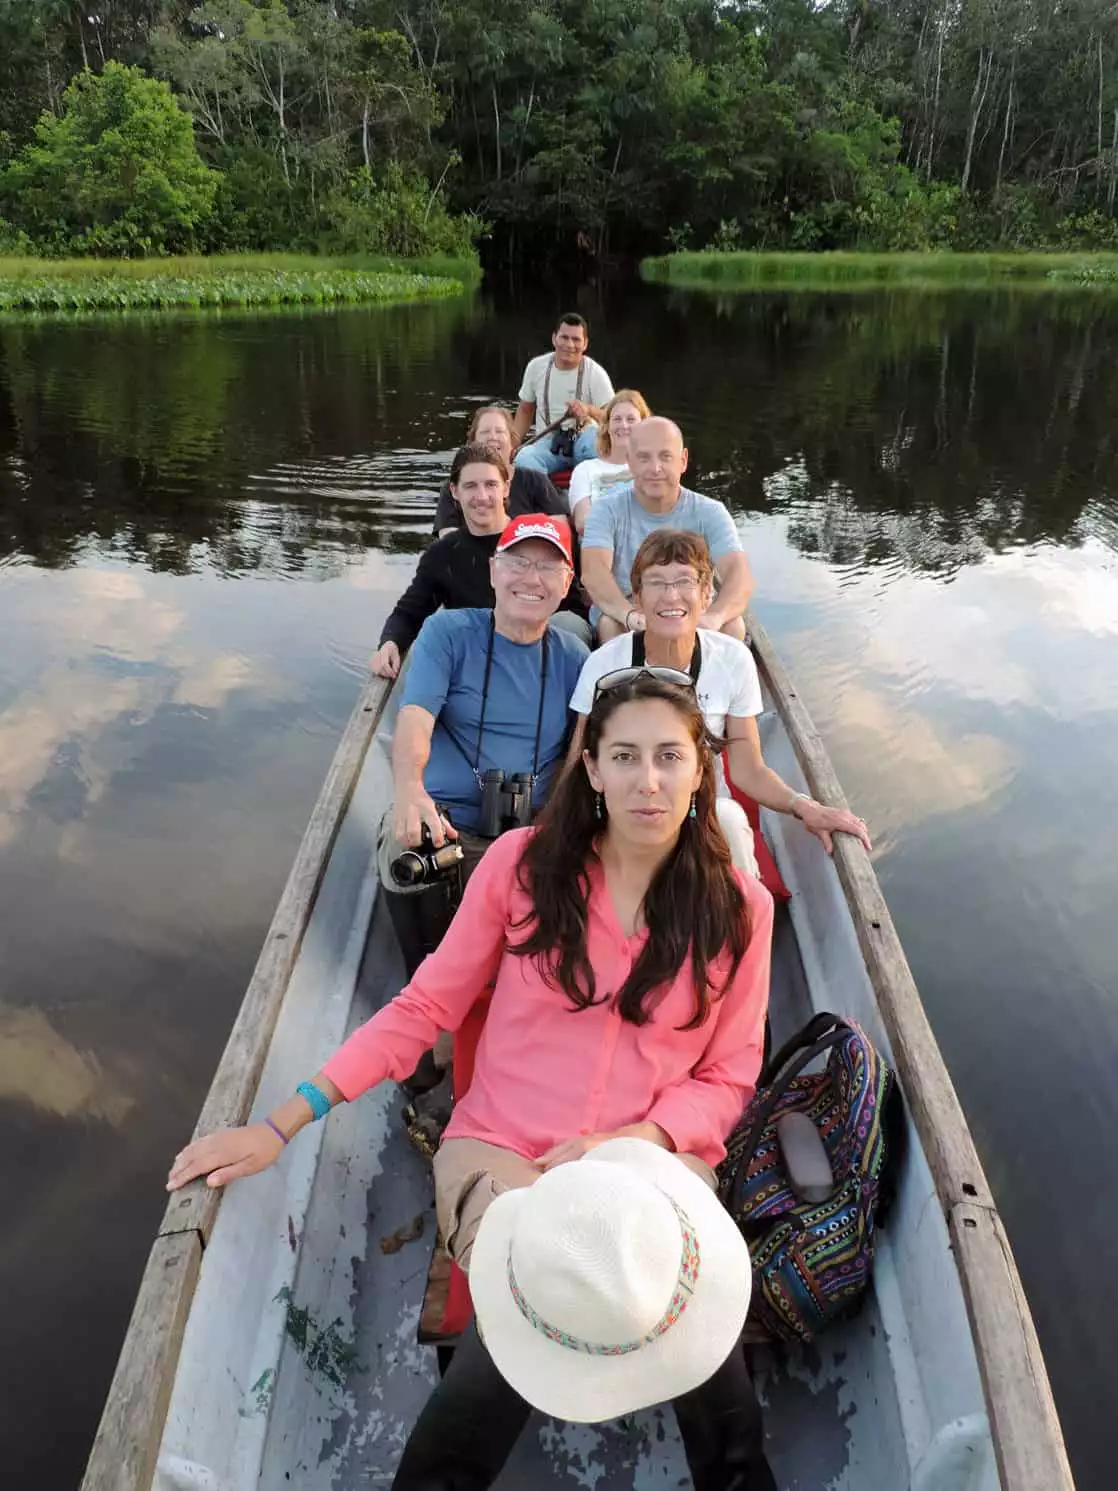 A group of Amazon travelers in a wooden canoe floating on a river in the Amazon.